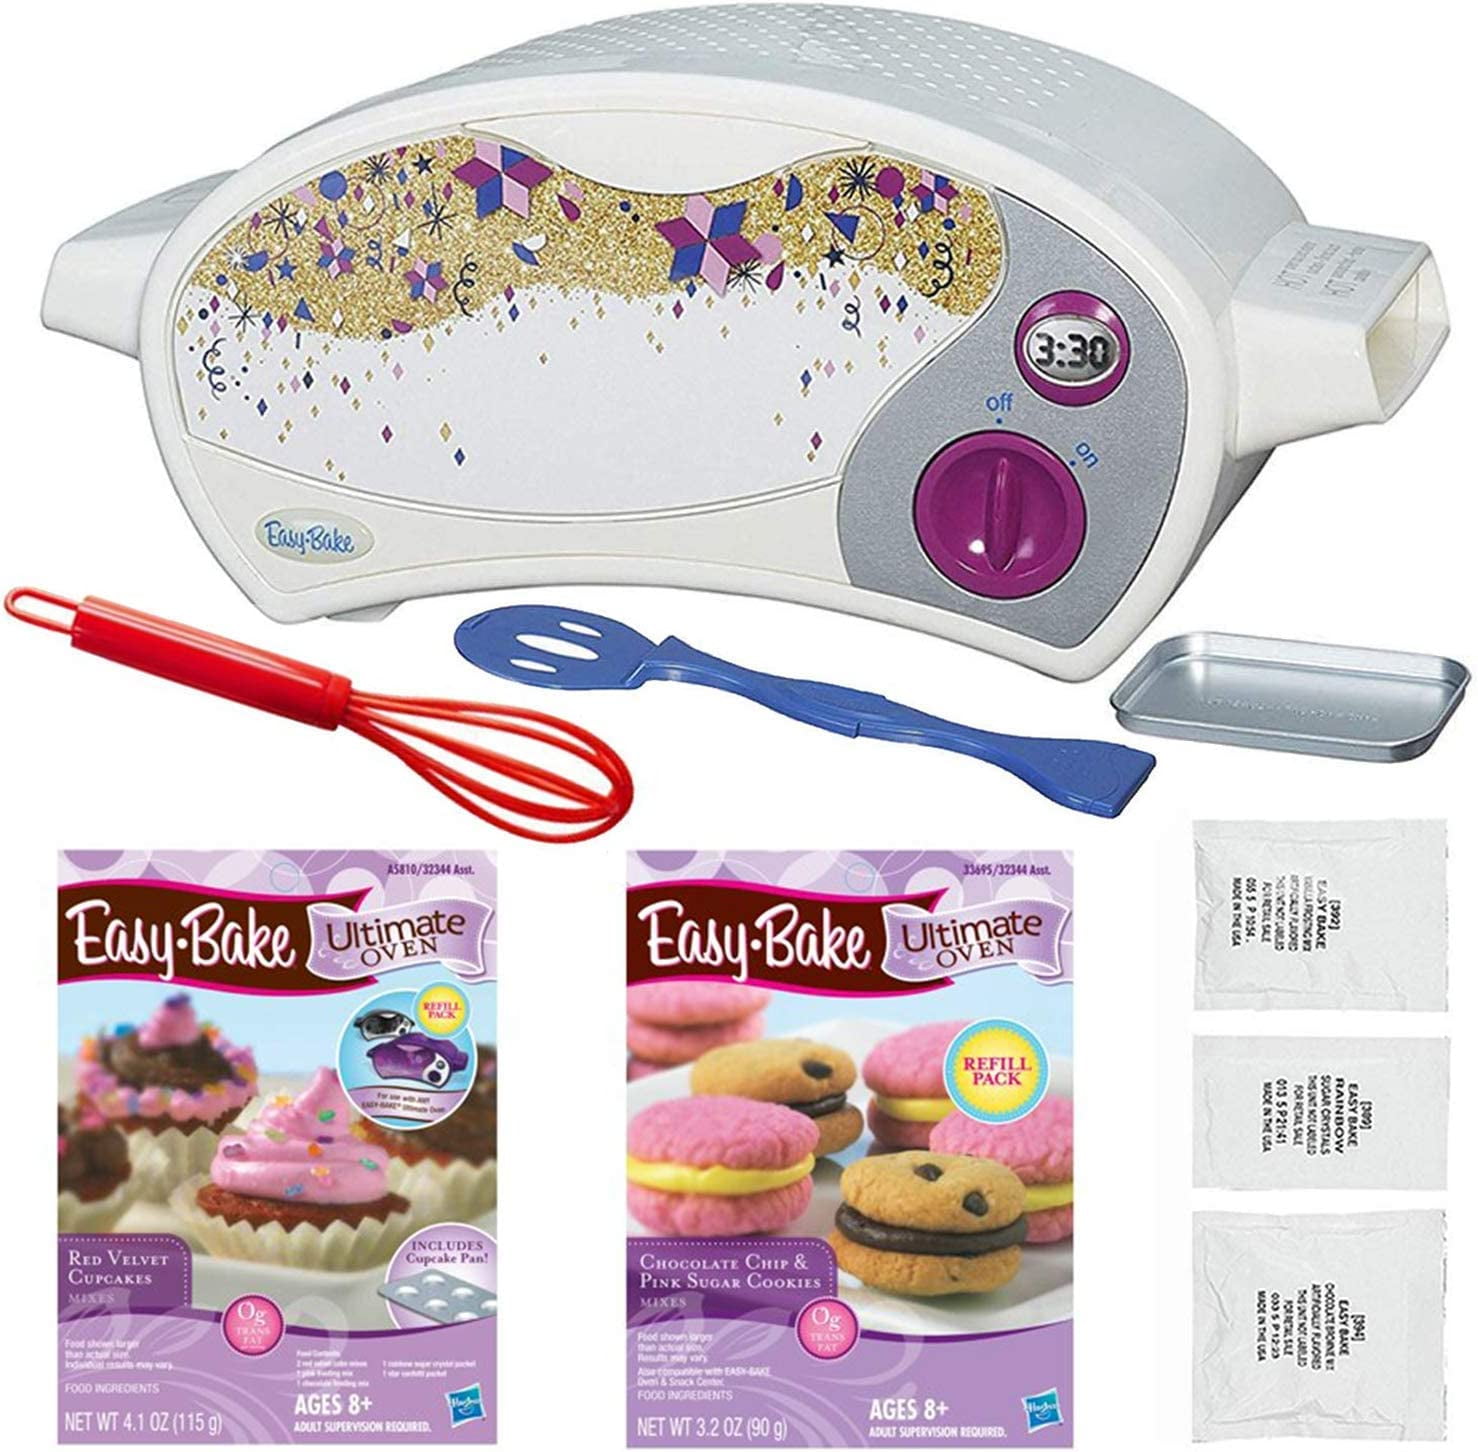 Easy-bake Ultimate Oven Cupcake Pan Replacement by Other